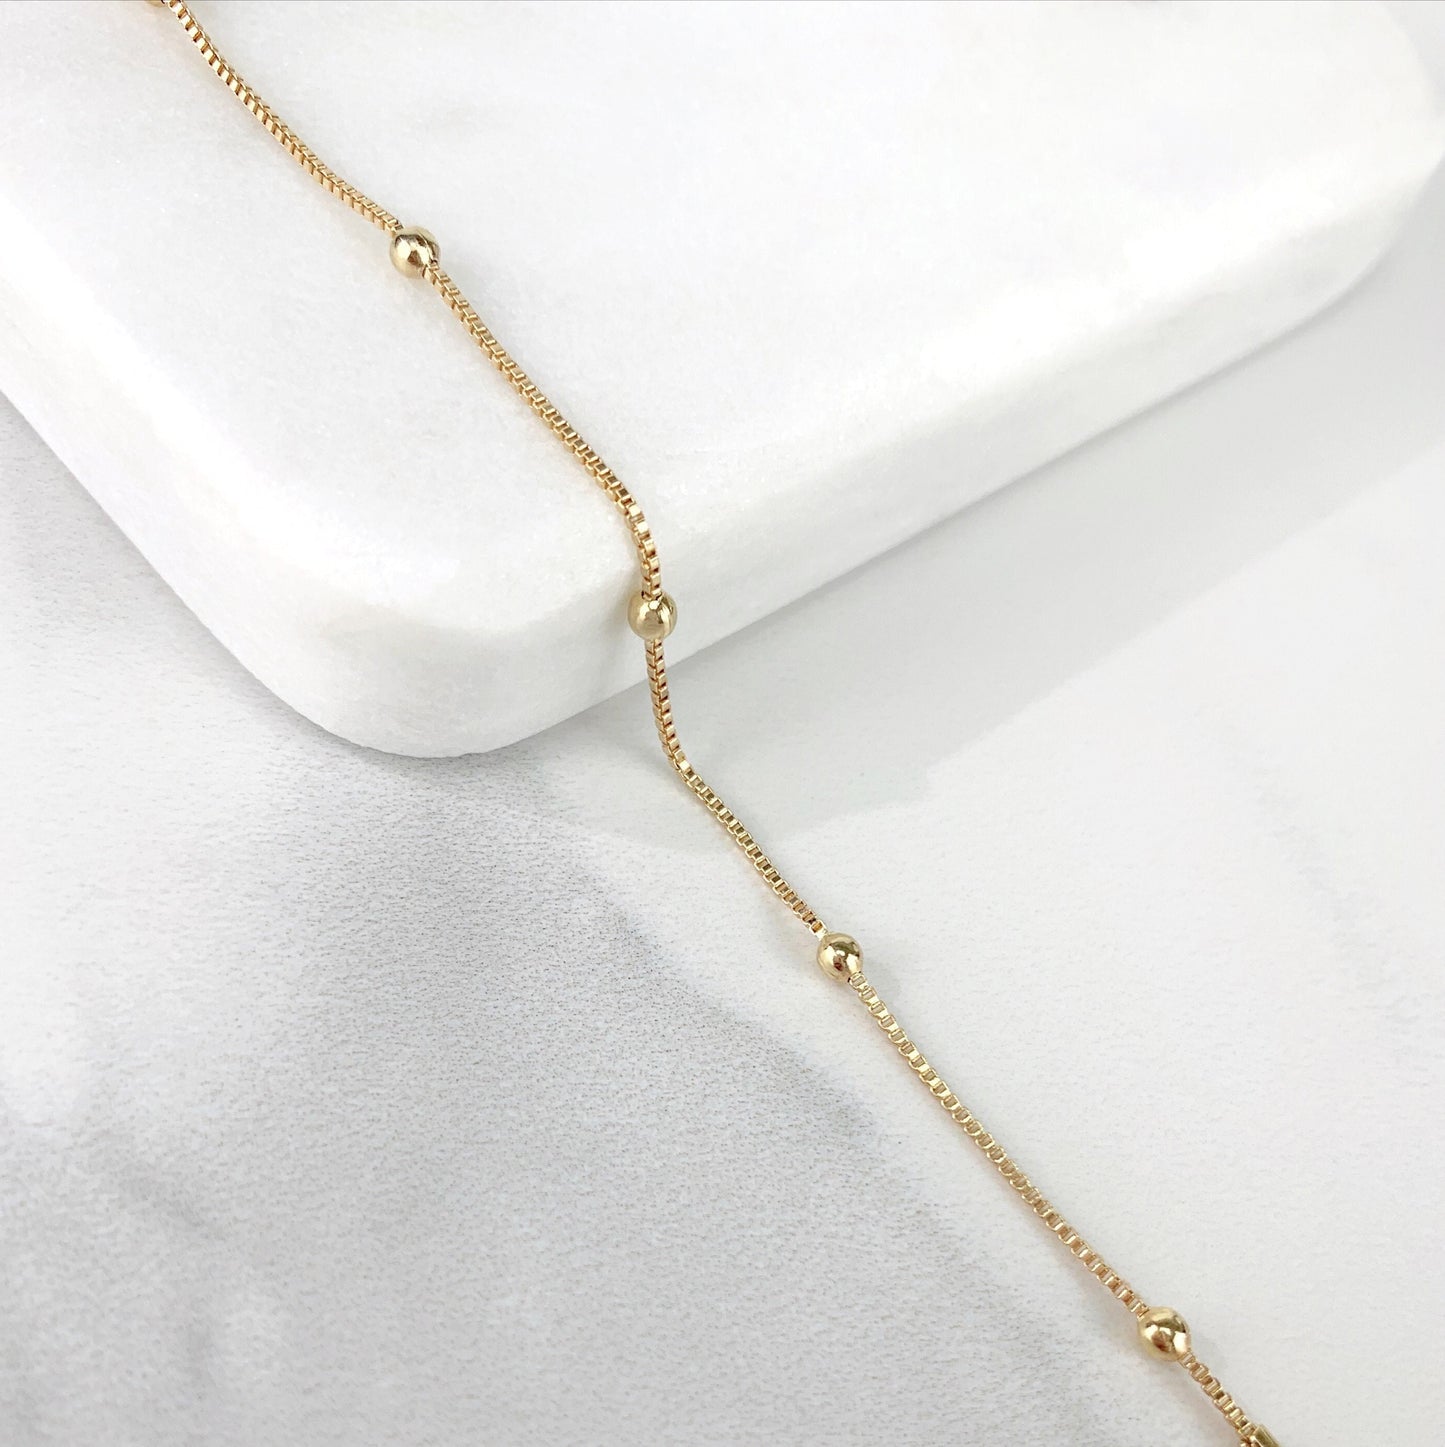 18k Gold Filled 1mm Bead Chain Satellite Chain Bracelet For Wholesale and Jewelry Supplies, Making Supplies